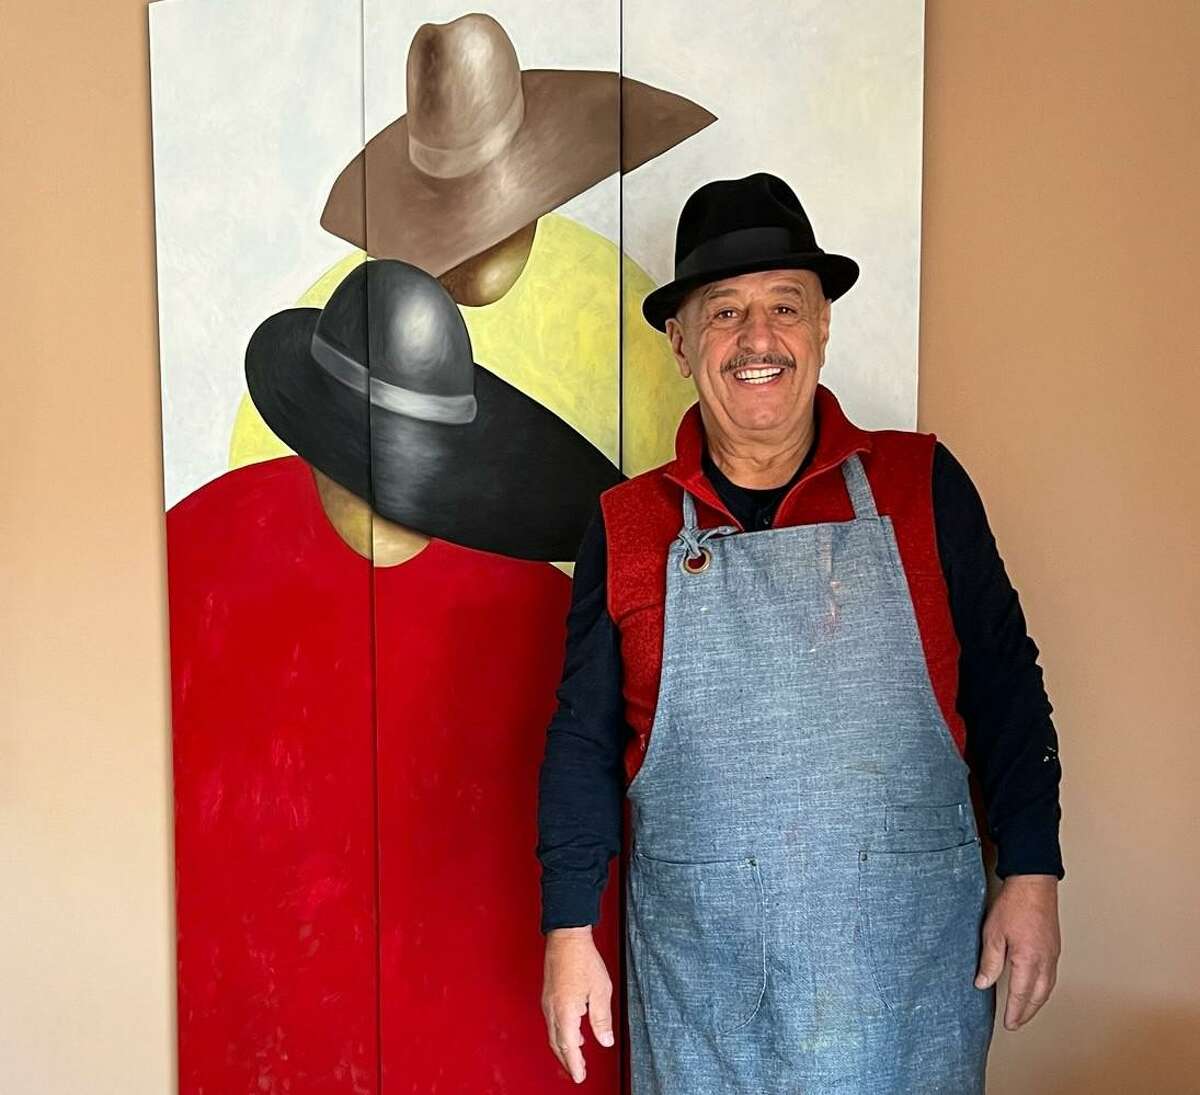 Pictured is Guilloume, the featured artist for The Fidelity Investments The Woodlands Waterway Arts Festival set for April 8-10, standing next to his featured original art “Celebrating Abundance.”